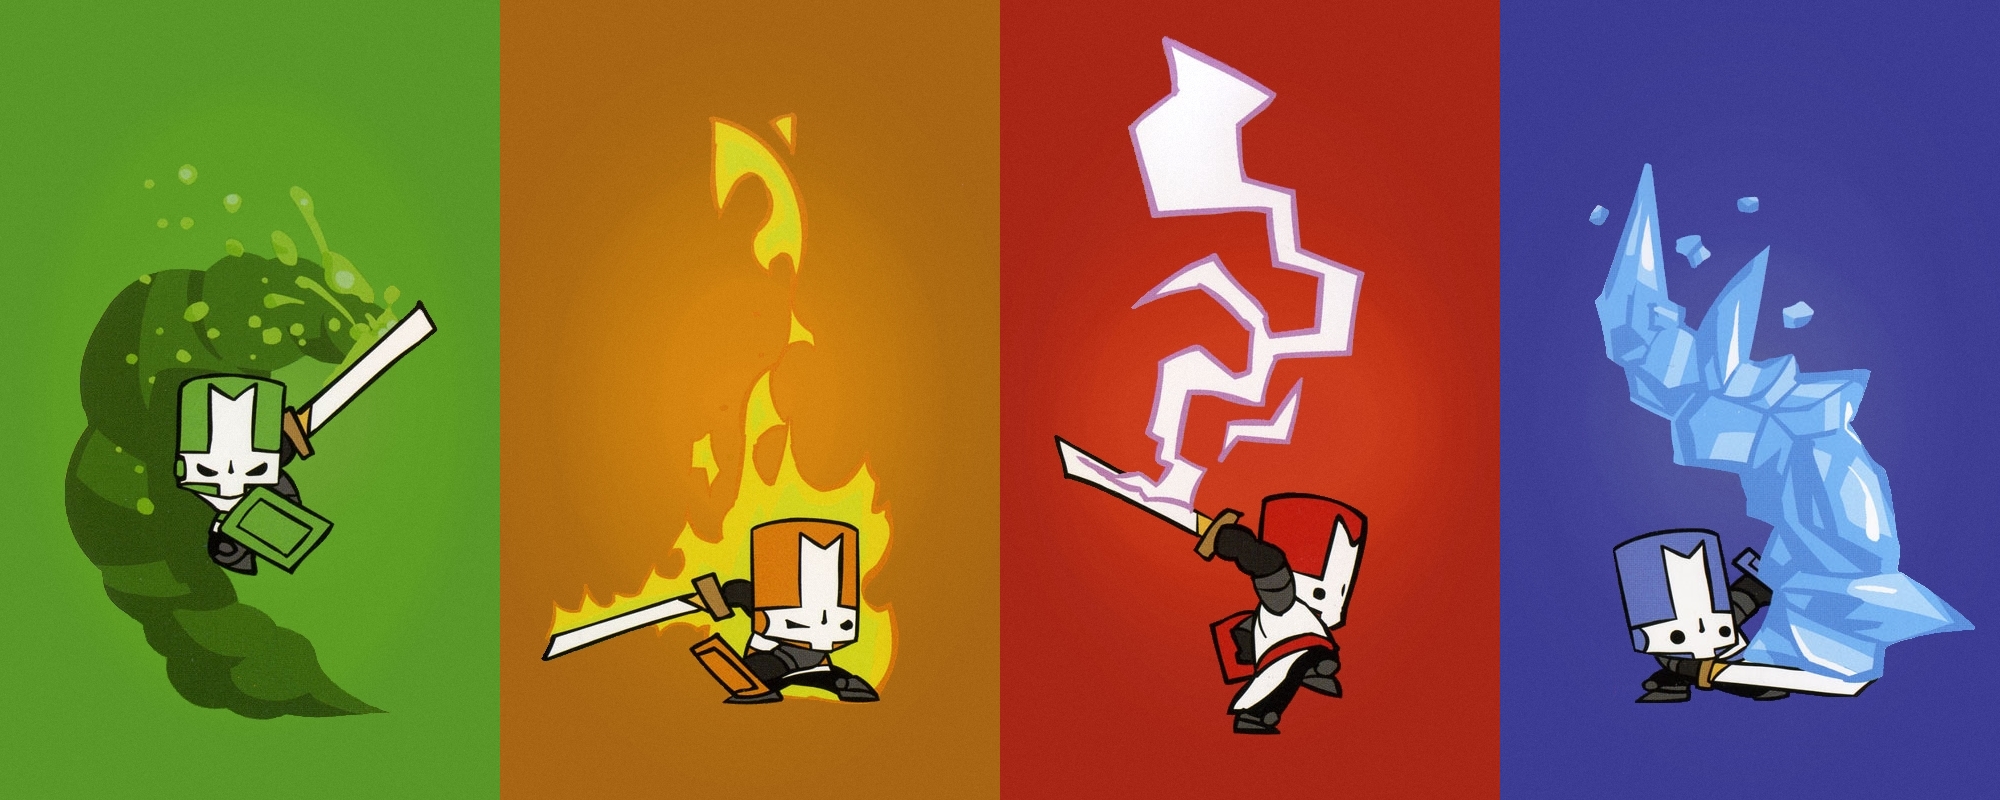 Castle Crashers By Cl0ud87